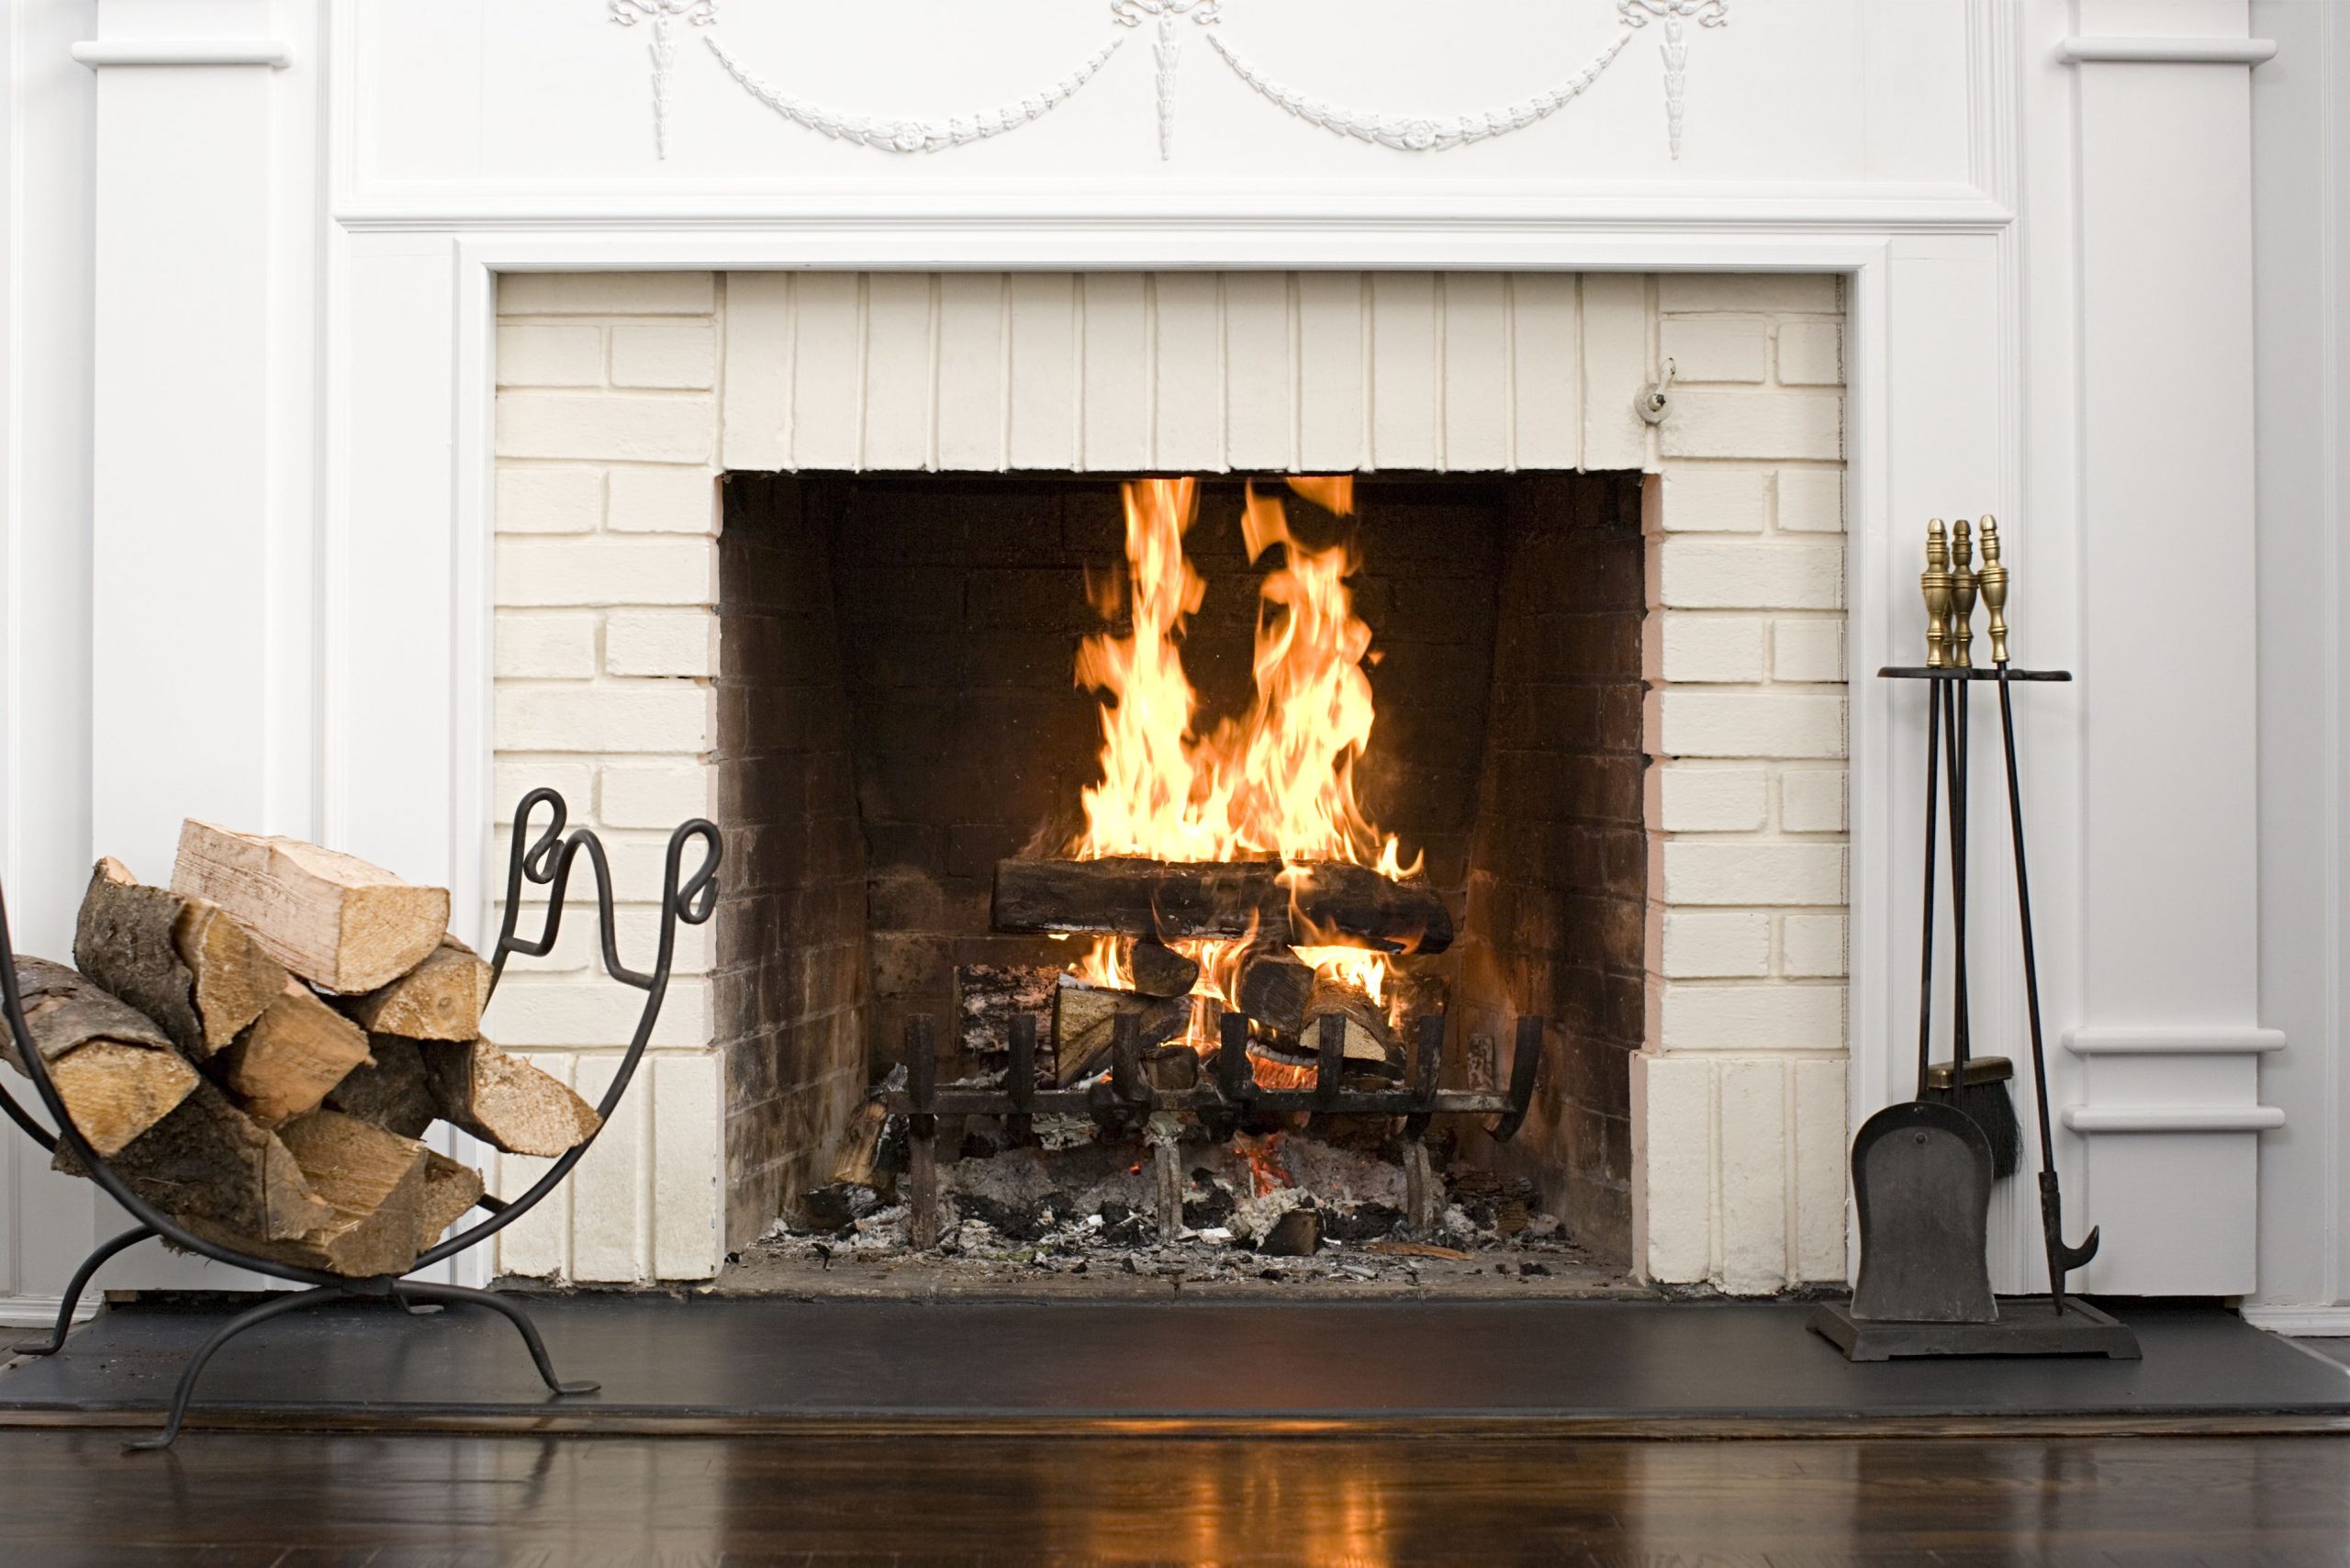 fireplace-with-fire-burning-royalty-free-image-75406522-1541632053